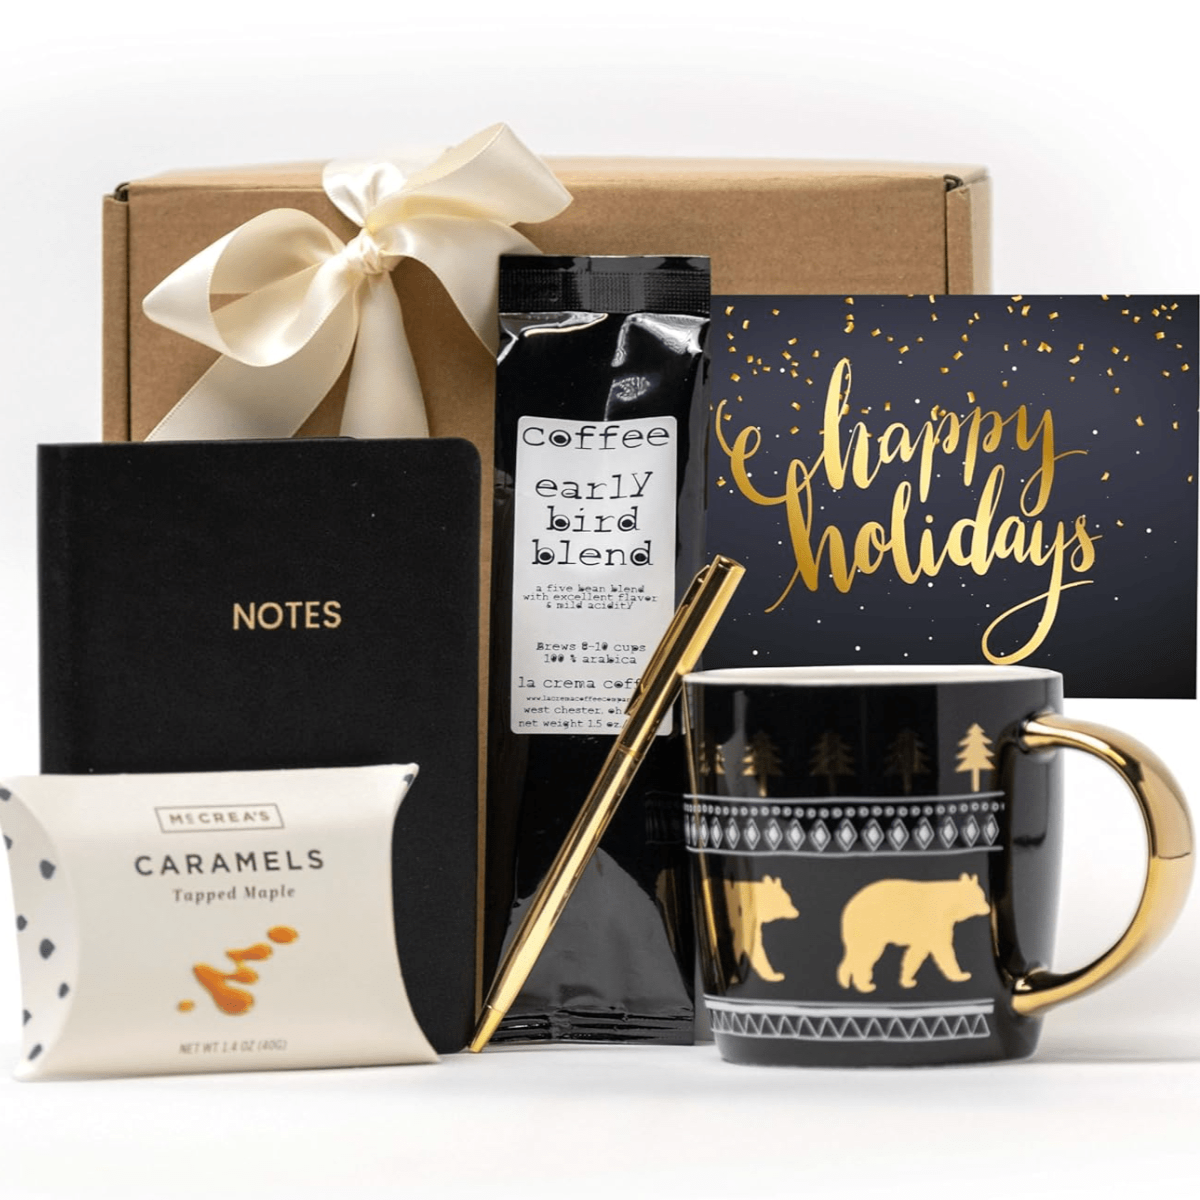 Happy Holidays! Flavored Coffee Gift Box w/Treats & Accessories